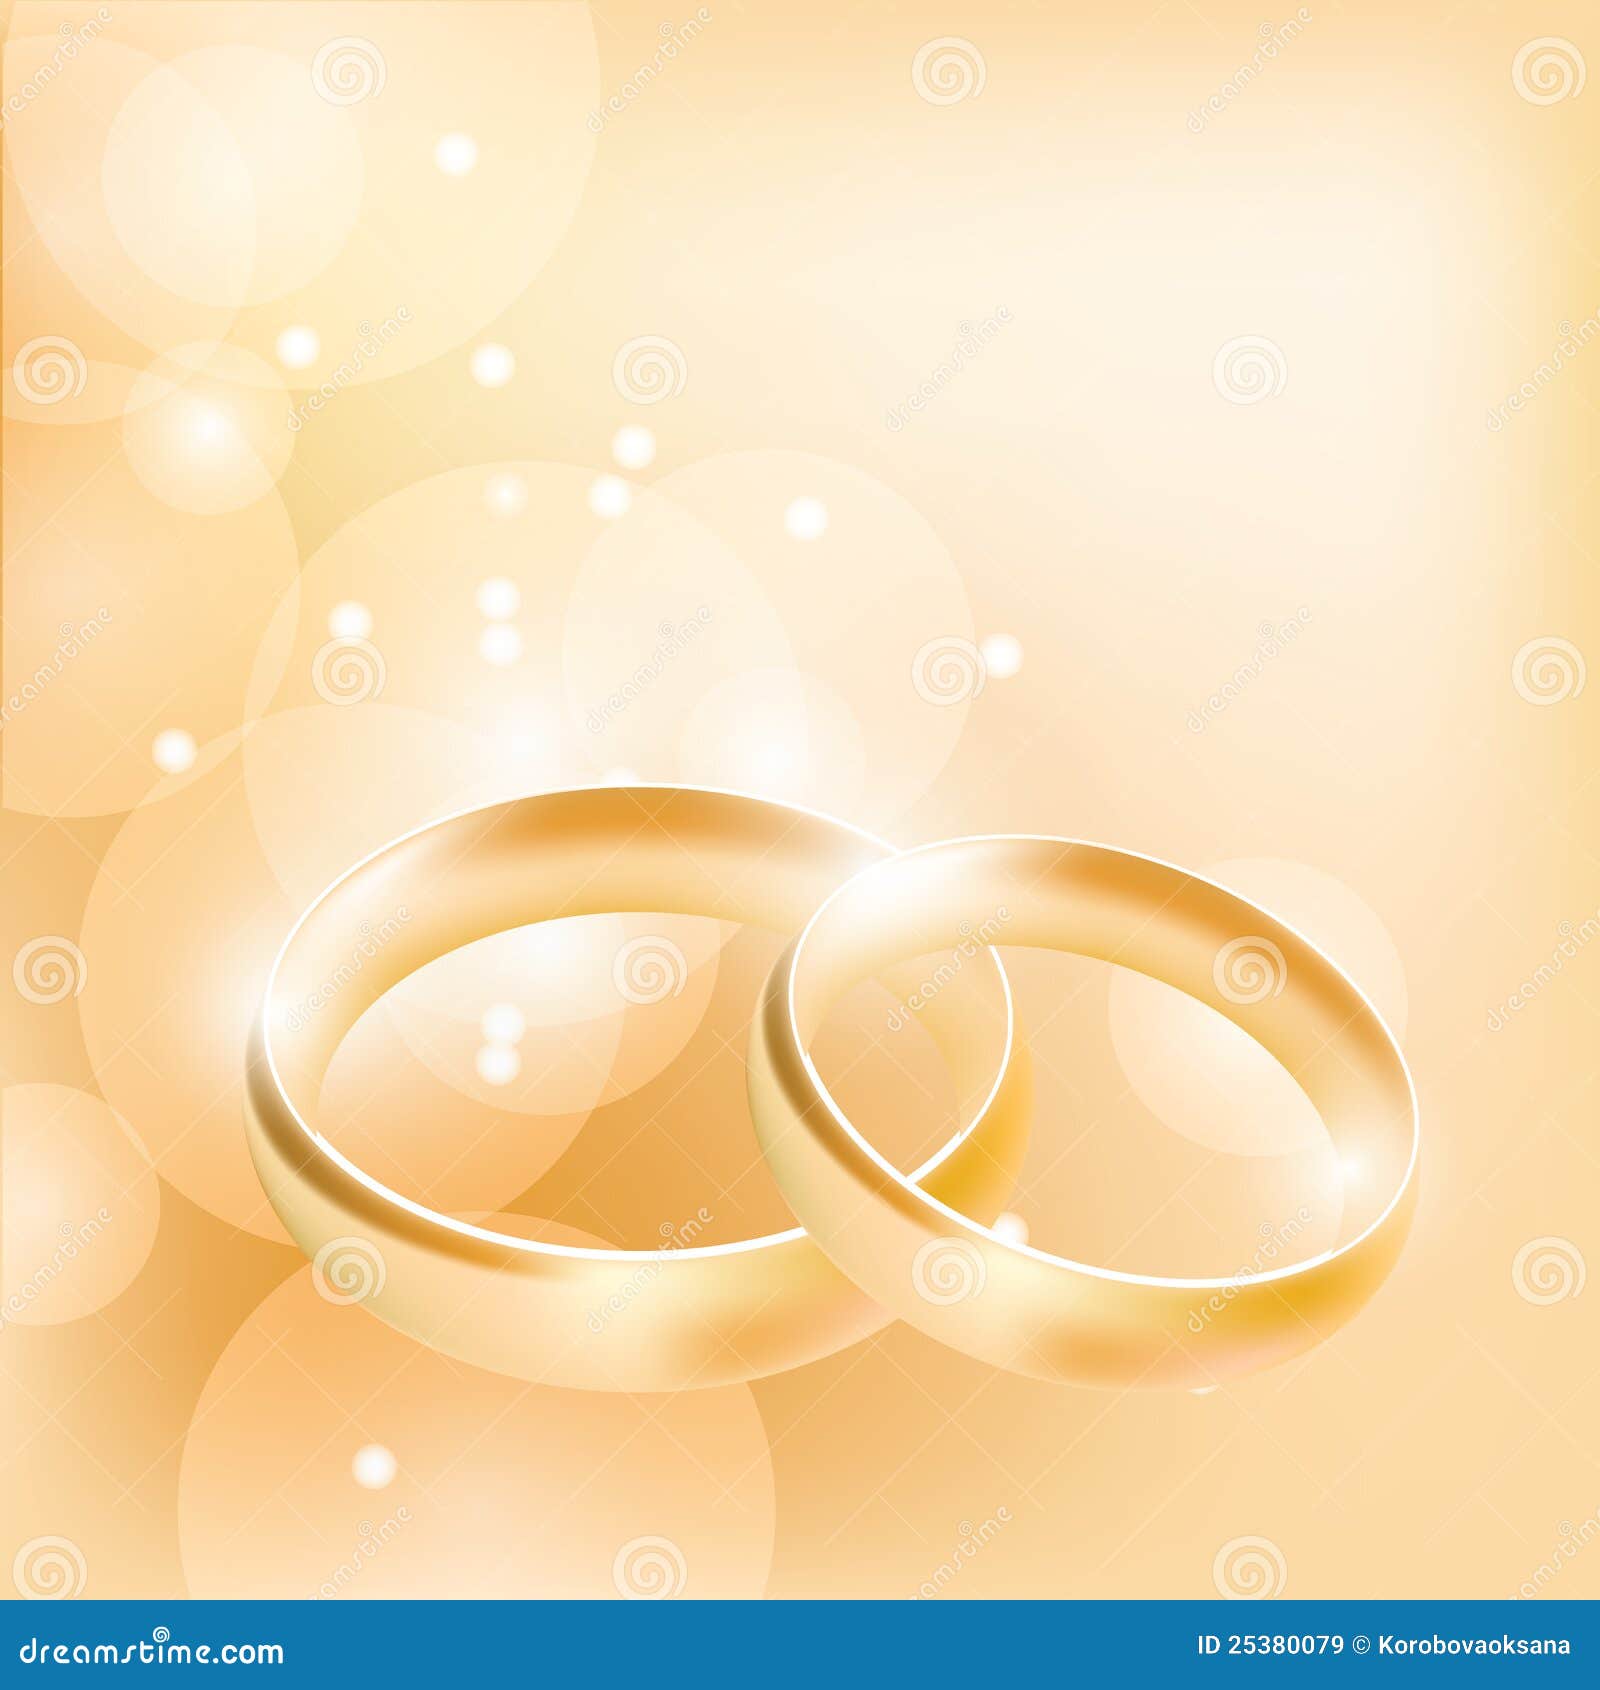 Wedding Rings On An Abstract Background Stock Vector - Illustration